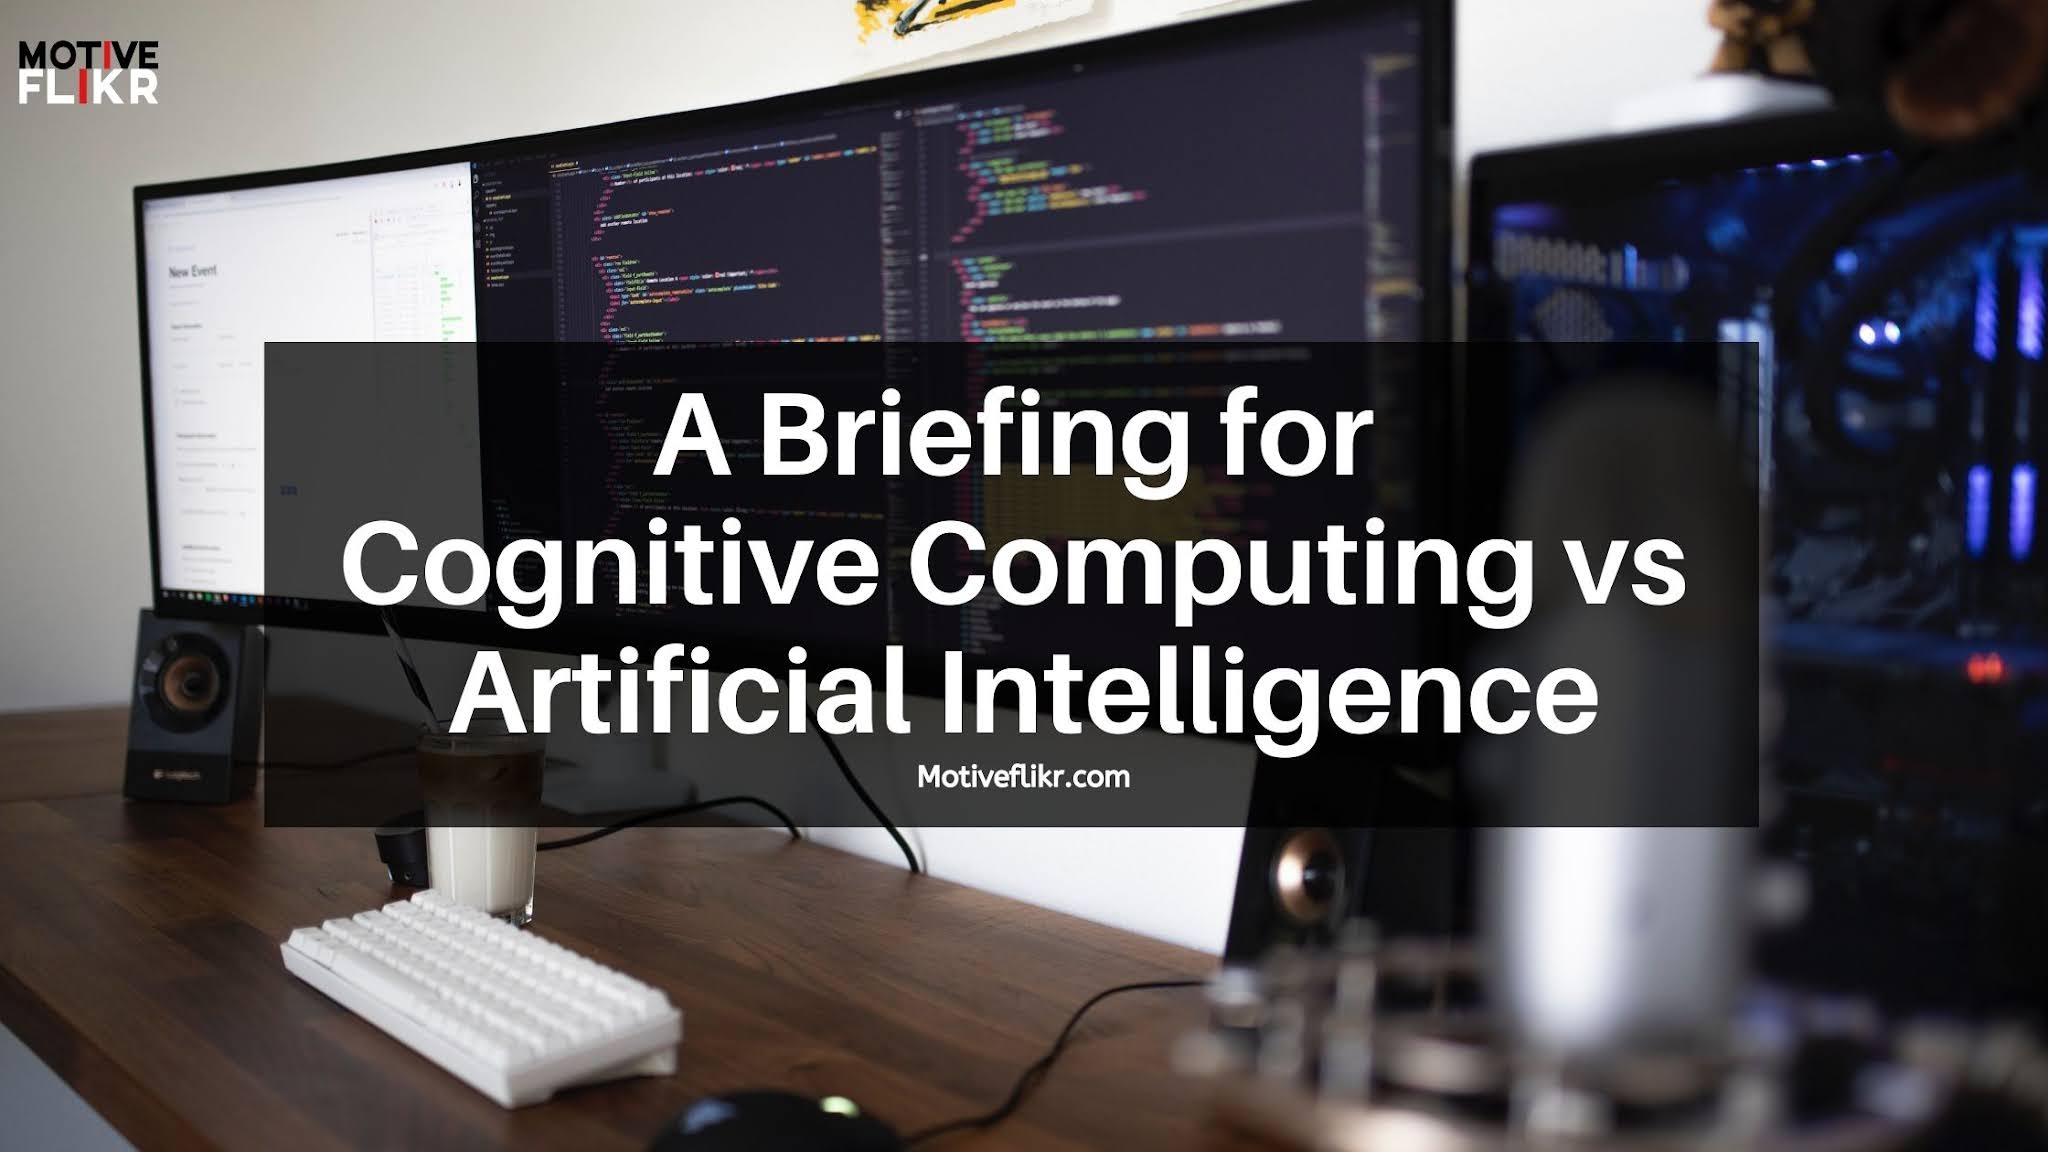 A Briefing for Cognitive Computing vs Artificial Intelligence